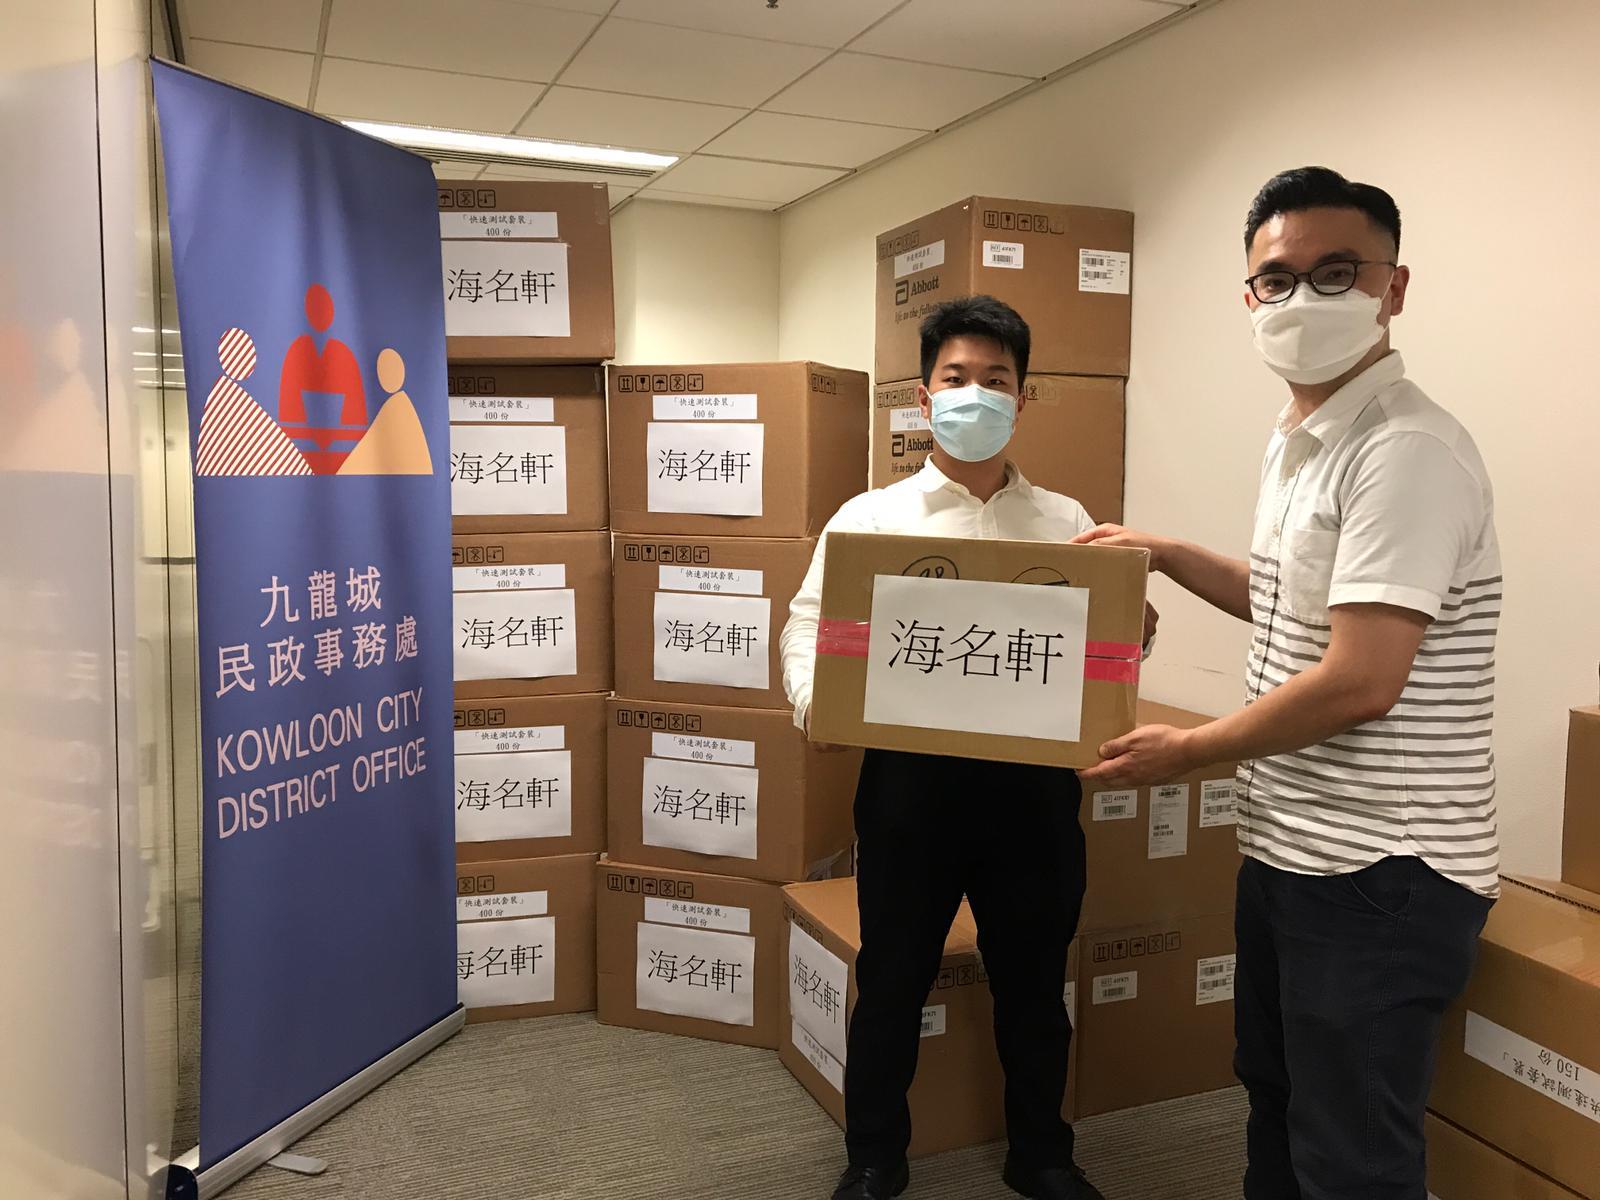 The Kowloon City District Office today (June 27) distributed COVID-19 rapid test kits to households, cleansing workers and property management staff living and working in Harbourfront Landmark for voluntary testing through the property management company.